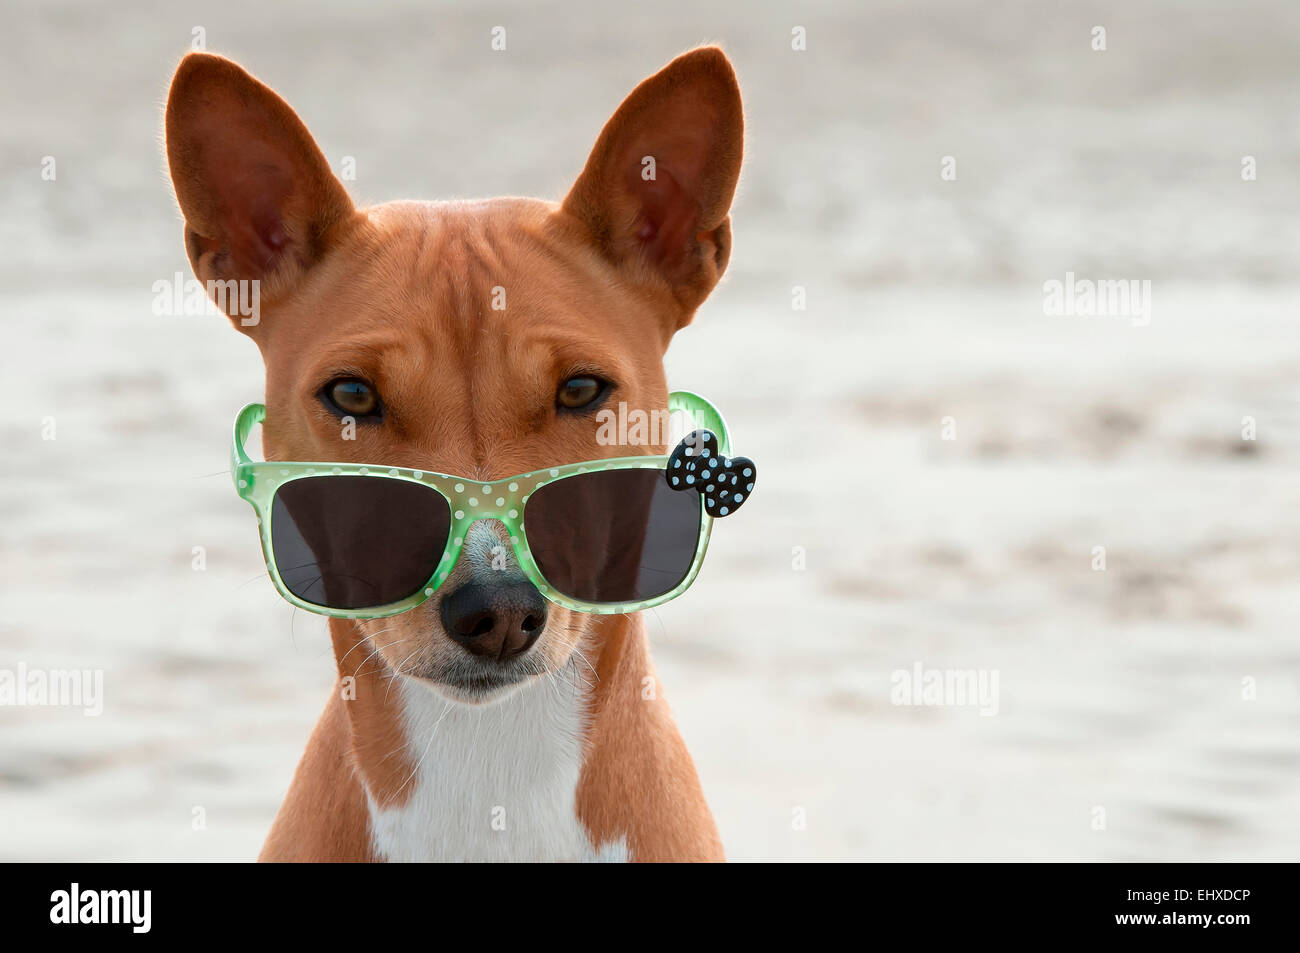 can a basenji live in netherlands